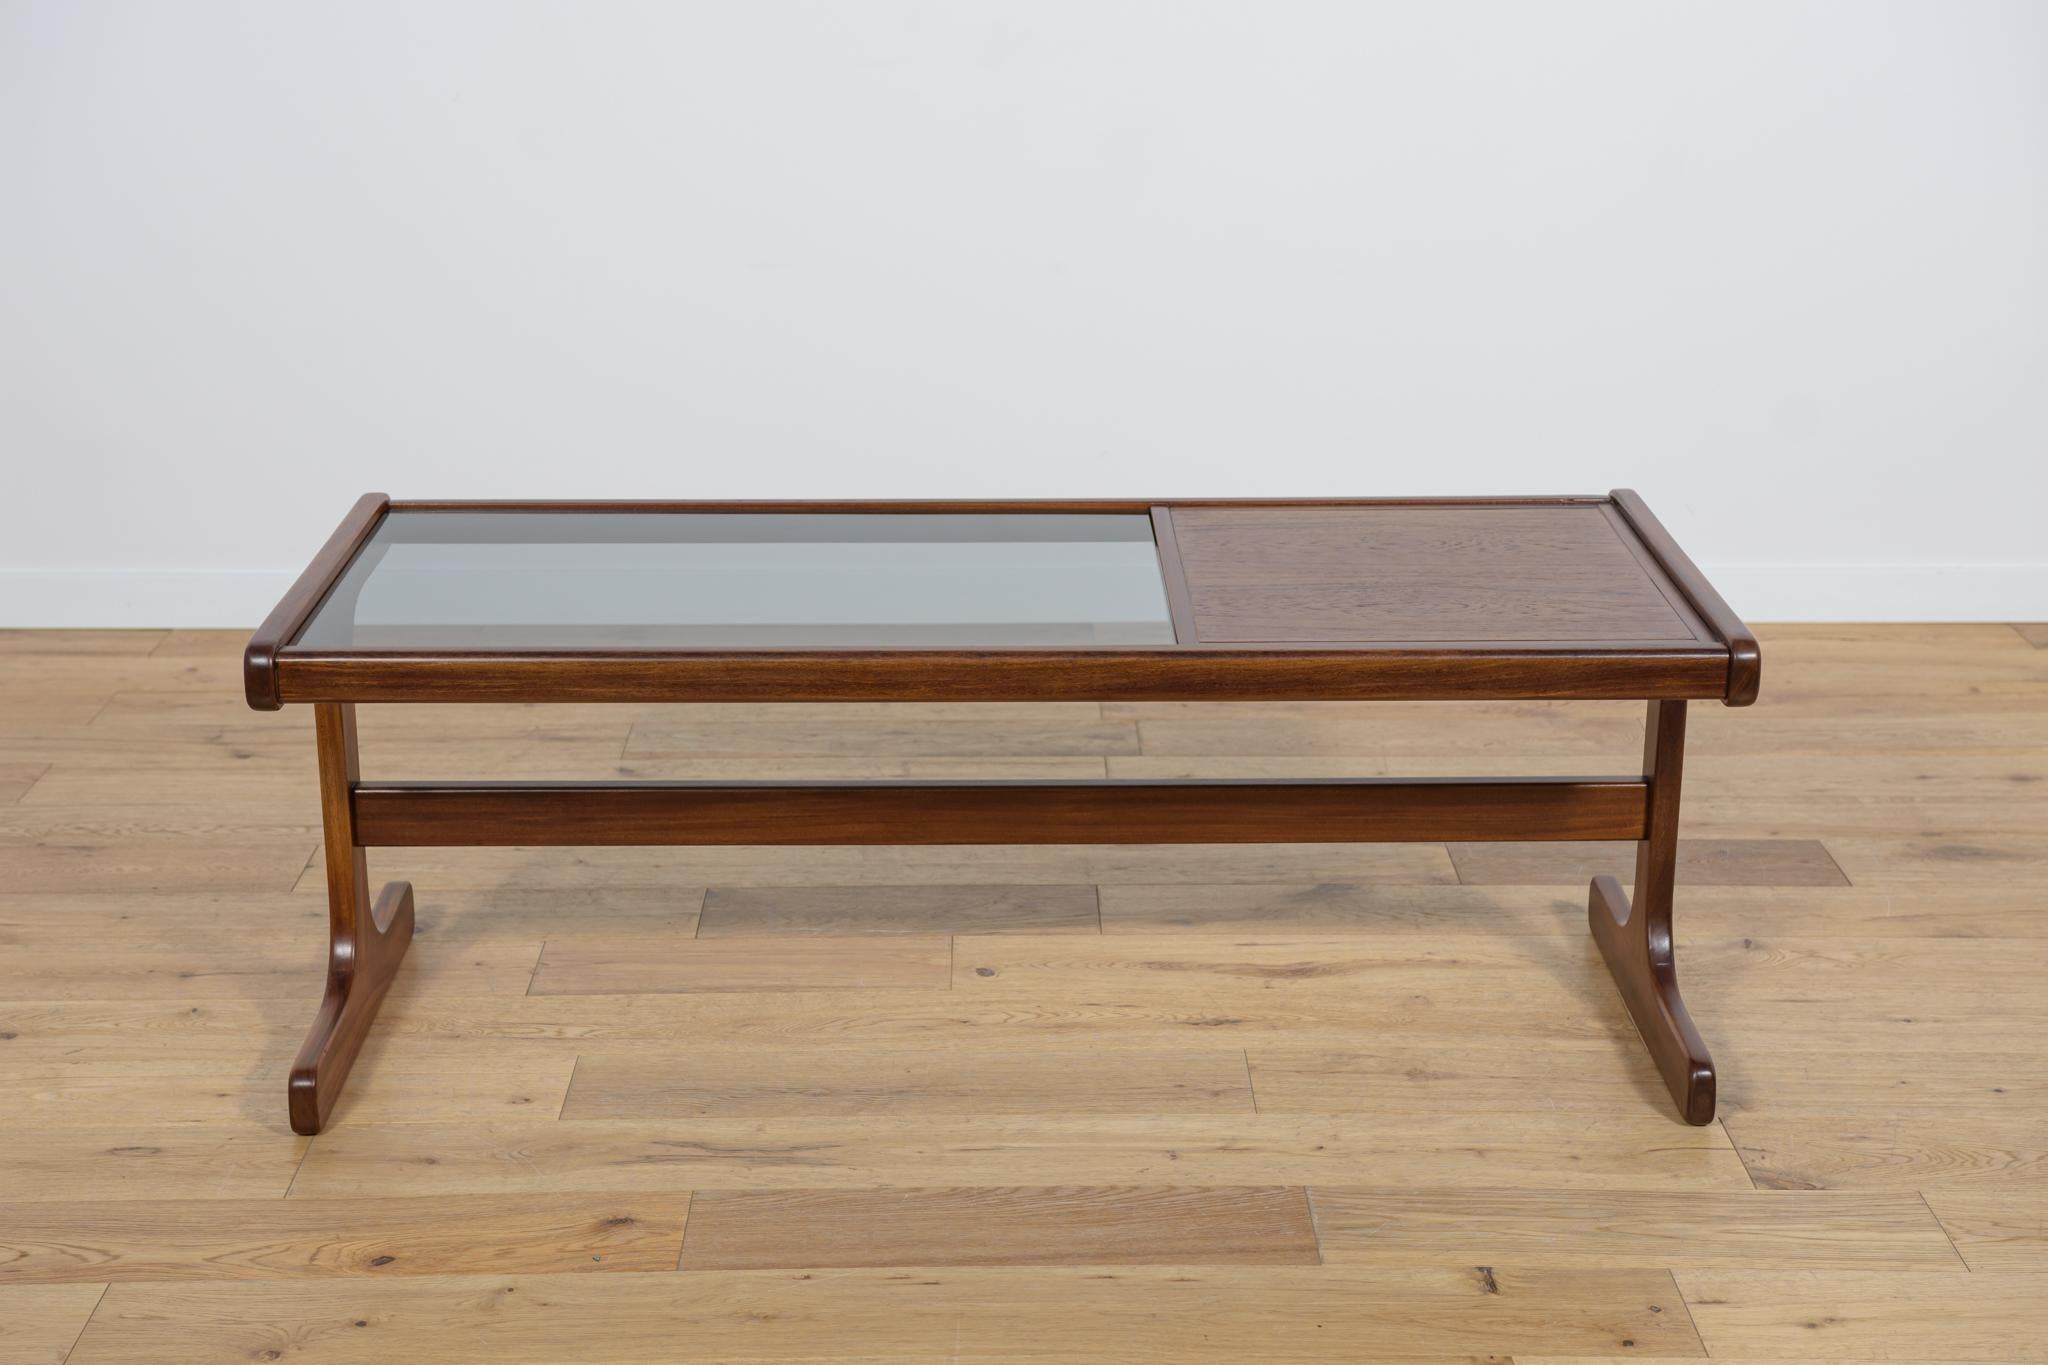 A coffee table produced in Great Britain by G-Plan in the 1960s. The entire piece has undergone a comprehensive carpentry renovation, the teak wood has been cleaned and finished with high-quality Danish oil. The tempered glass was replaced with a